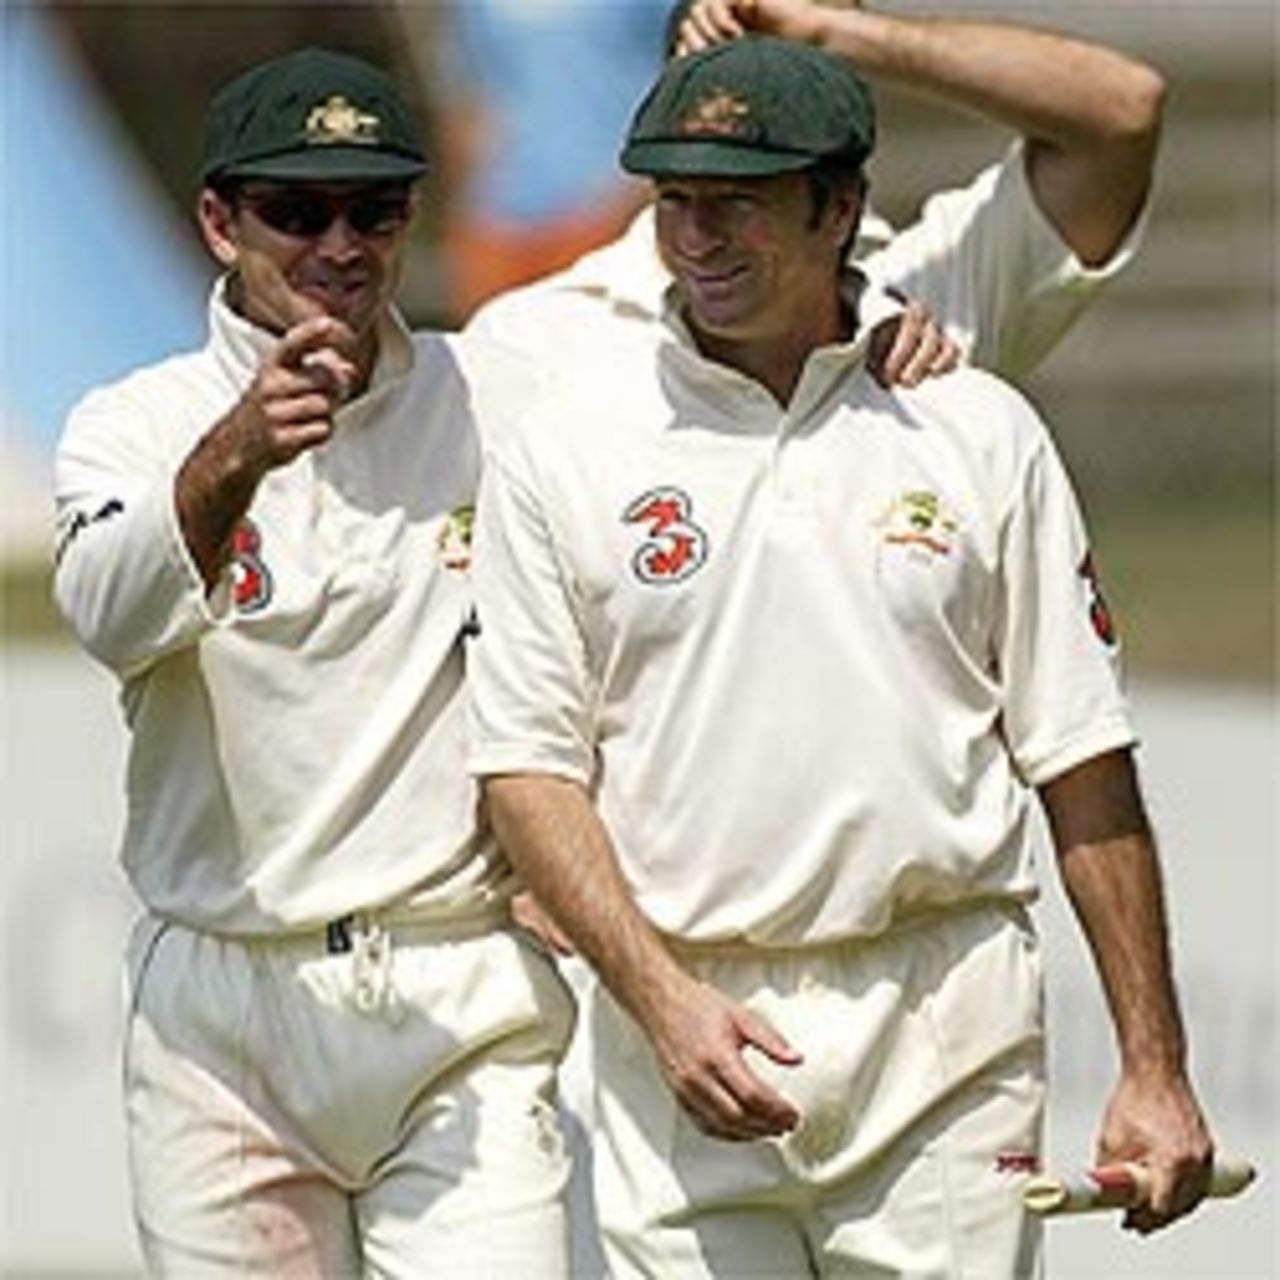 Steve Waugh of Australia (r), who was named man of the match with team mate Ricky Ponting share a laugh during day three of the First Test between Australia and Bangladesh played at Marrara Oval July 20, 2003 in Darwin, Australia